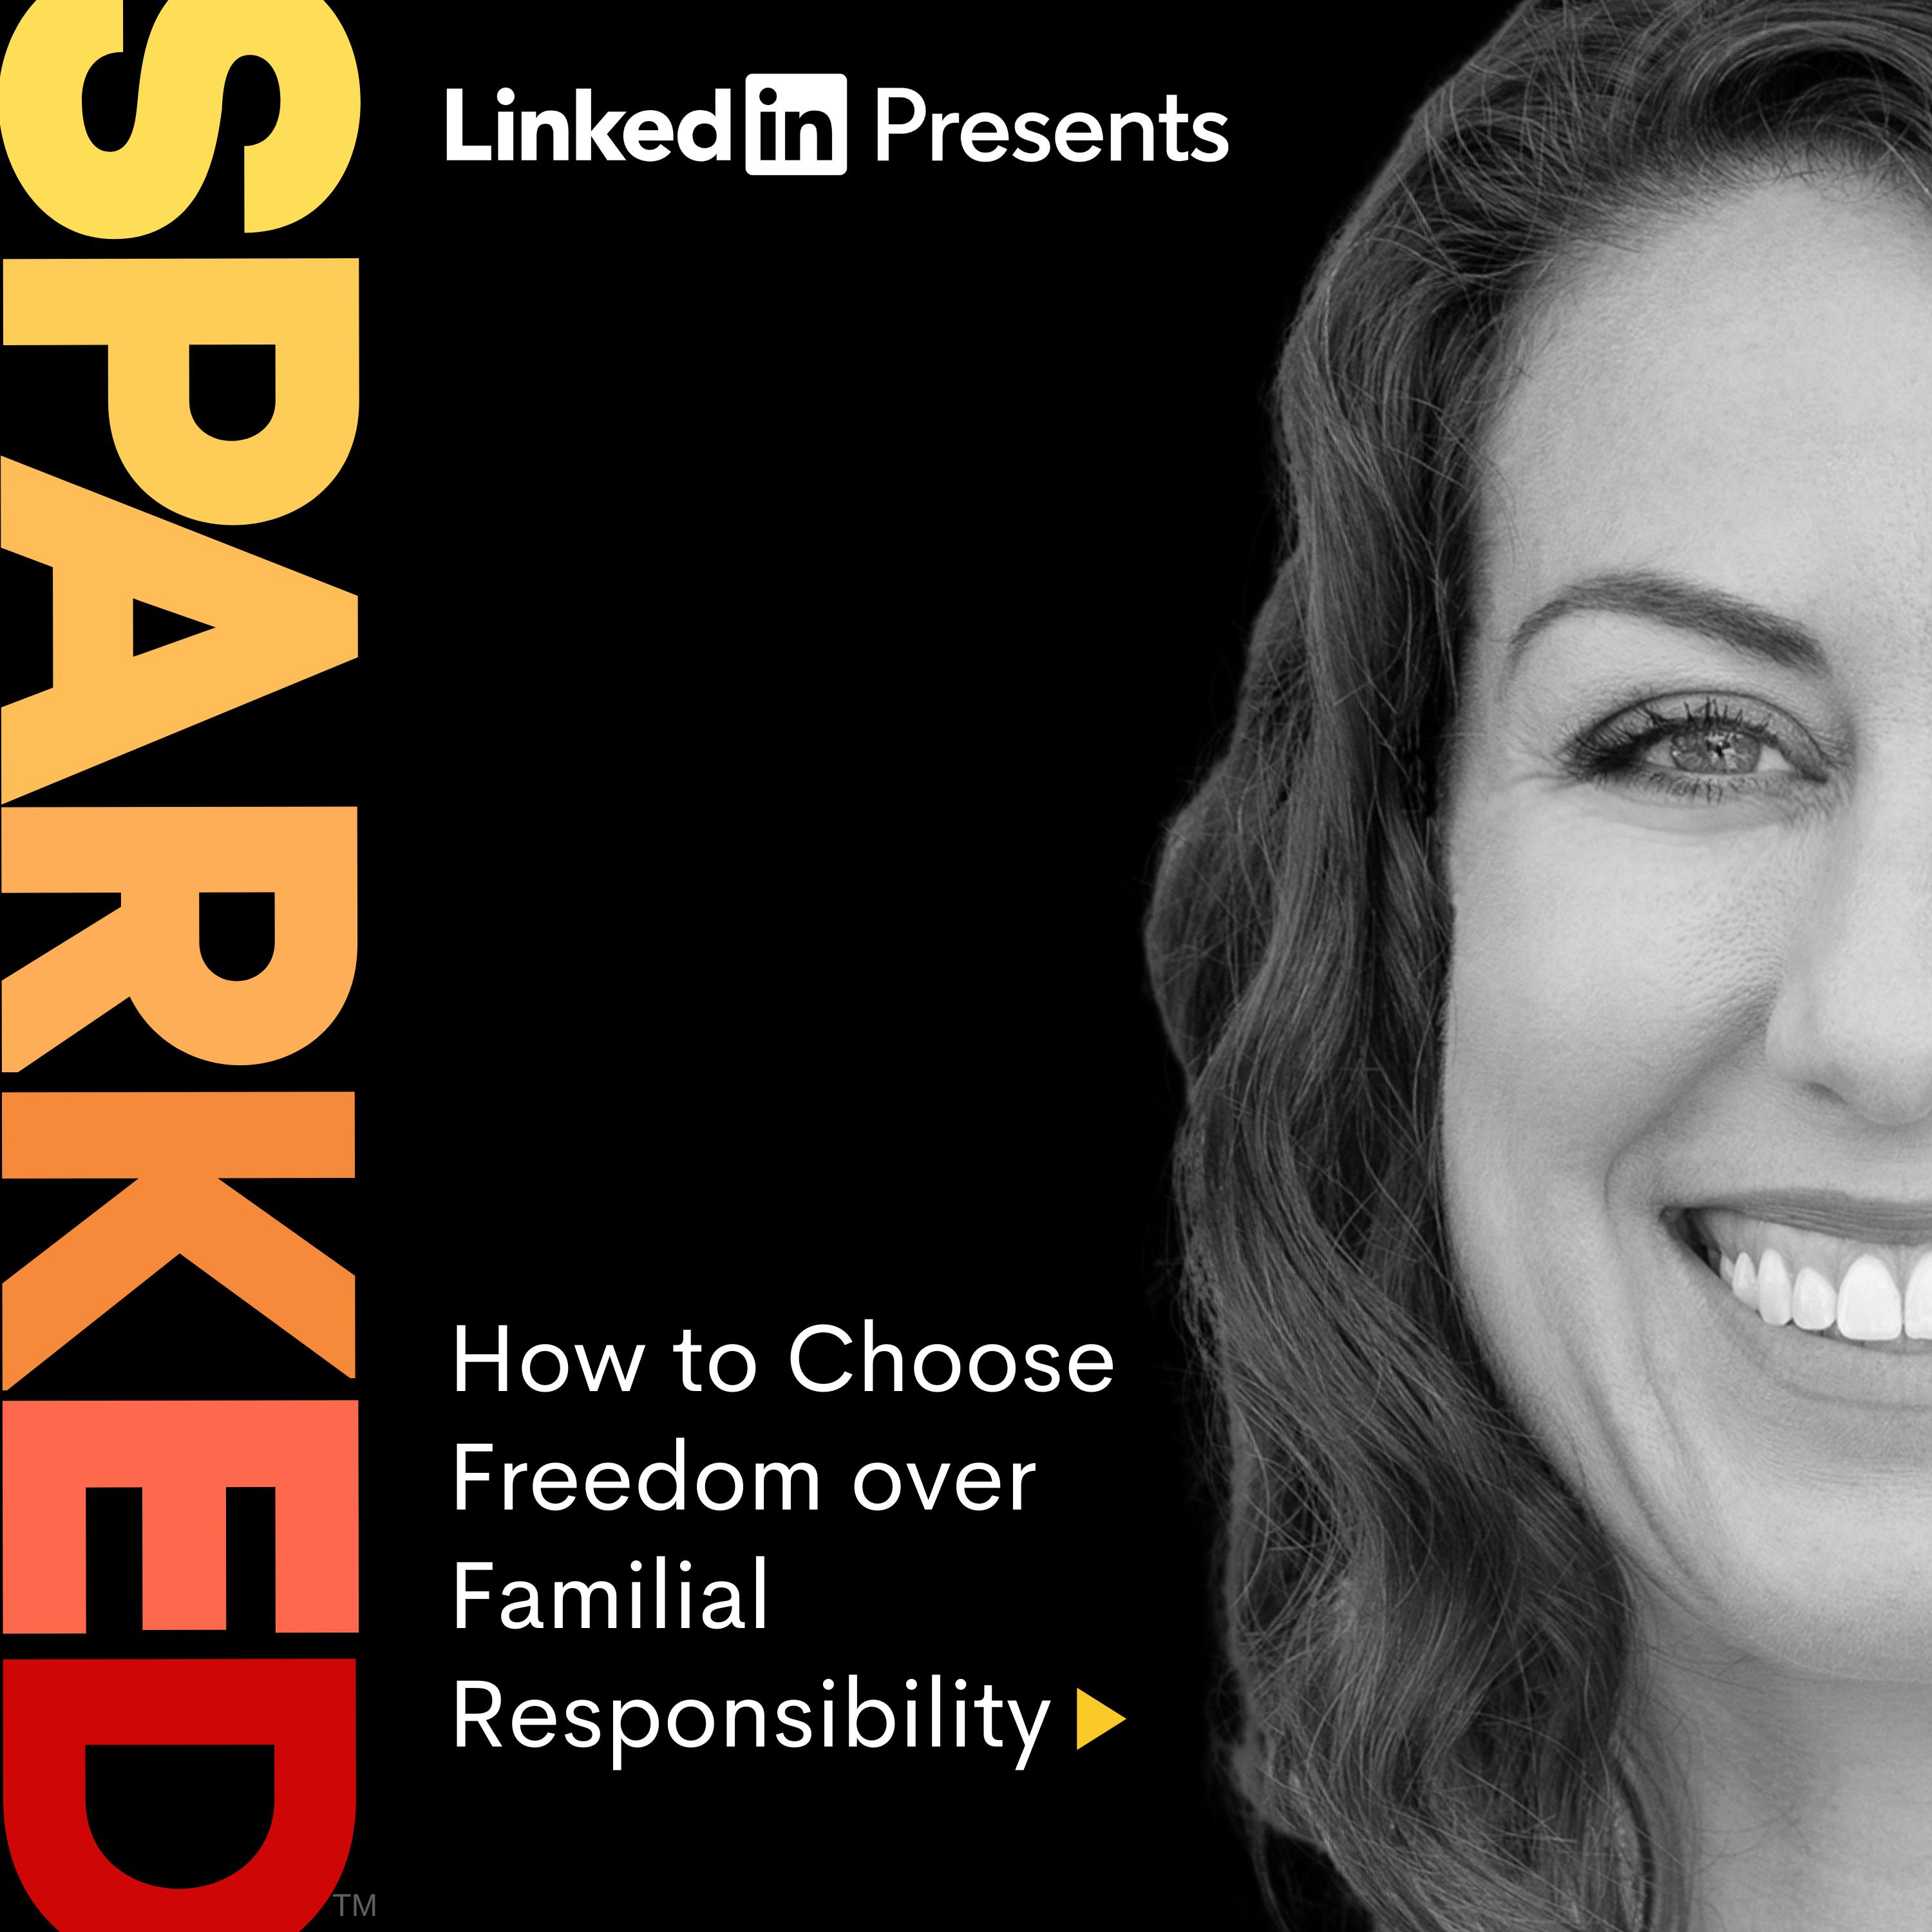 How to Choose Freedom over Familial Responsibility